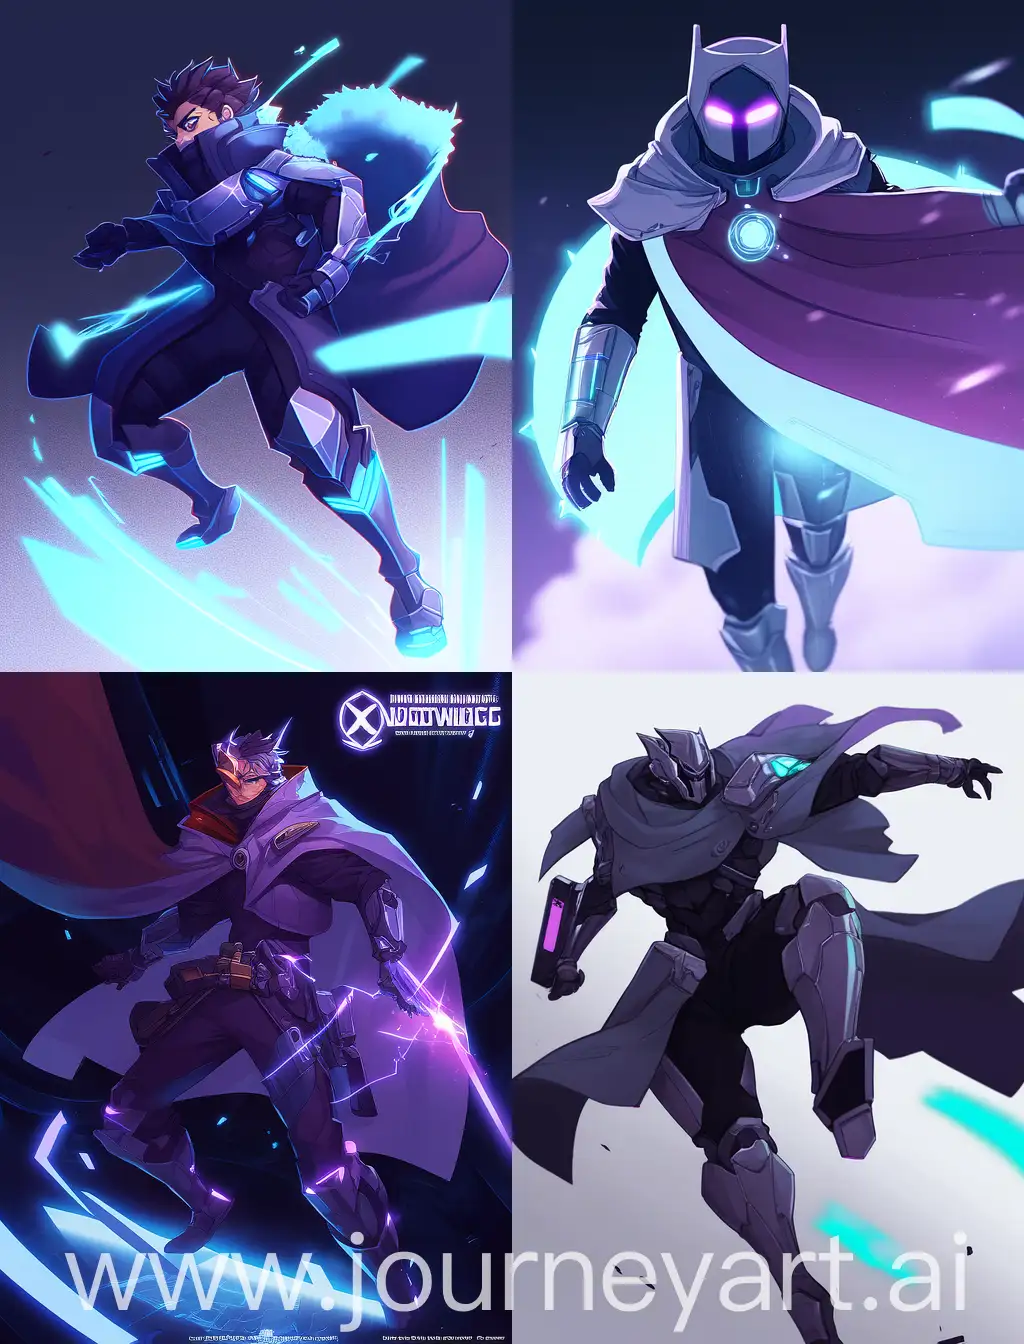 INVINCIBLE CHARACTER ANIMATION STYLE DRESSED IN A COOL CLOAK, AND SCI FI HIGH TECH.